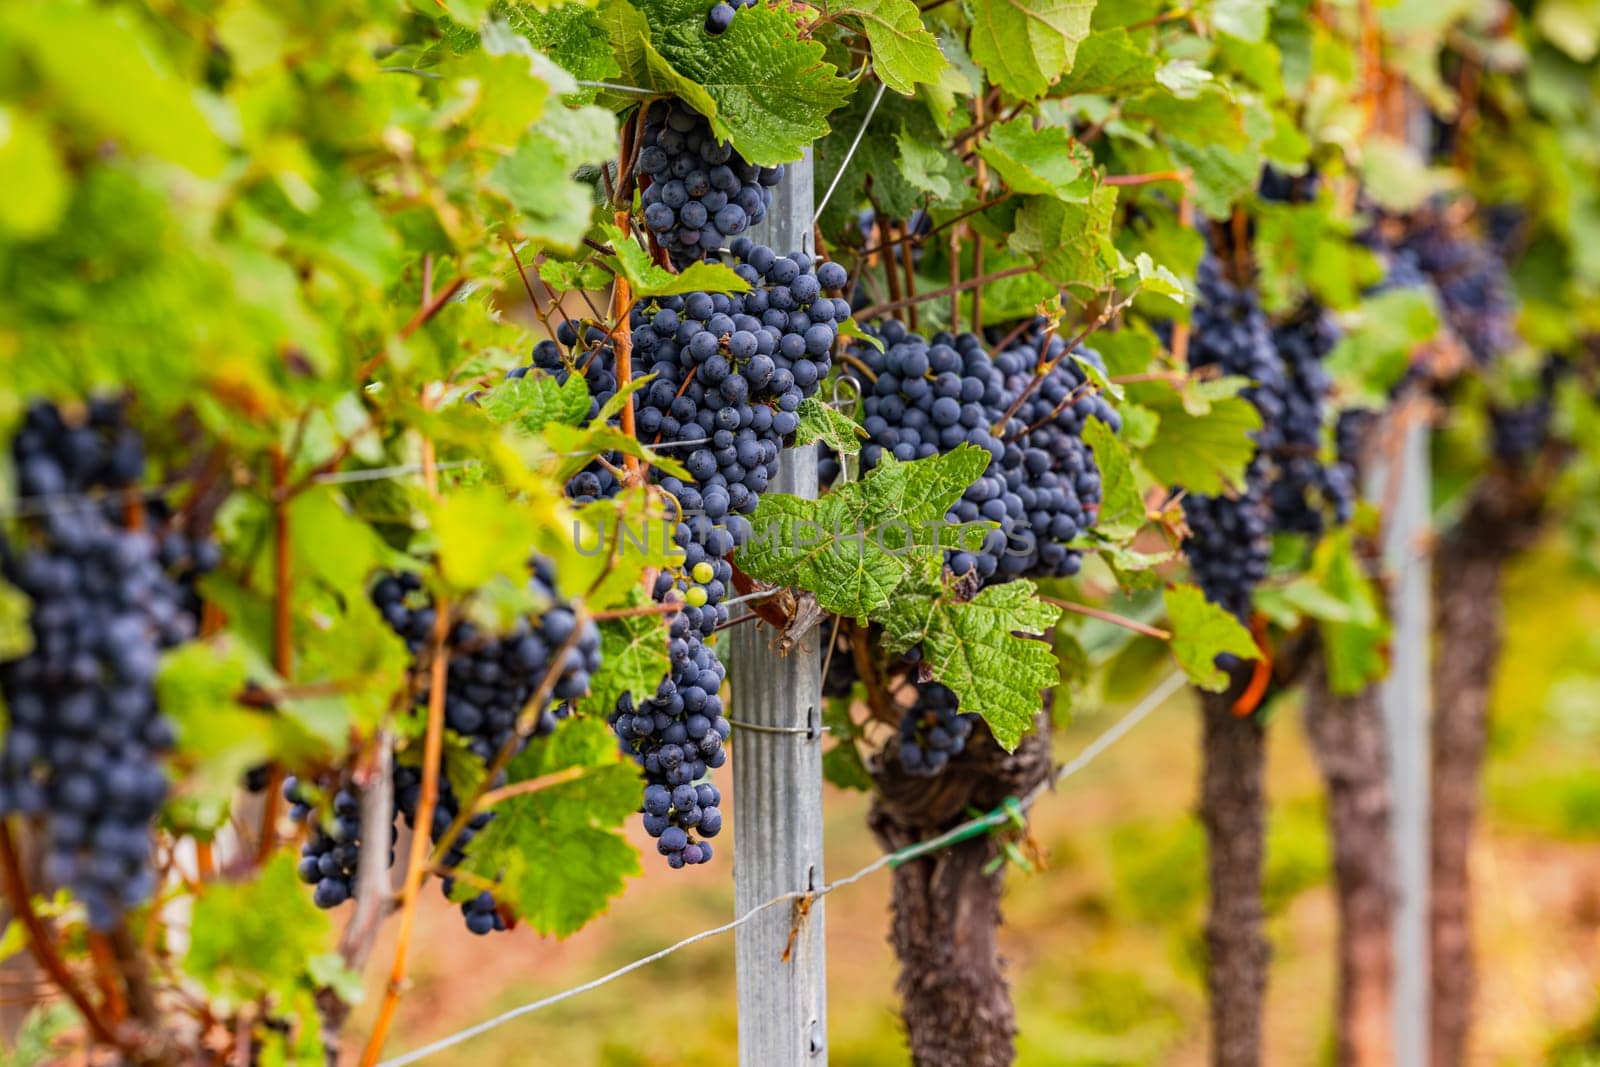 Many vines with clusters of blue grapes on old vines, Rhineland Palatinate, Germany